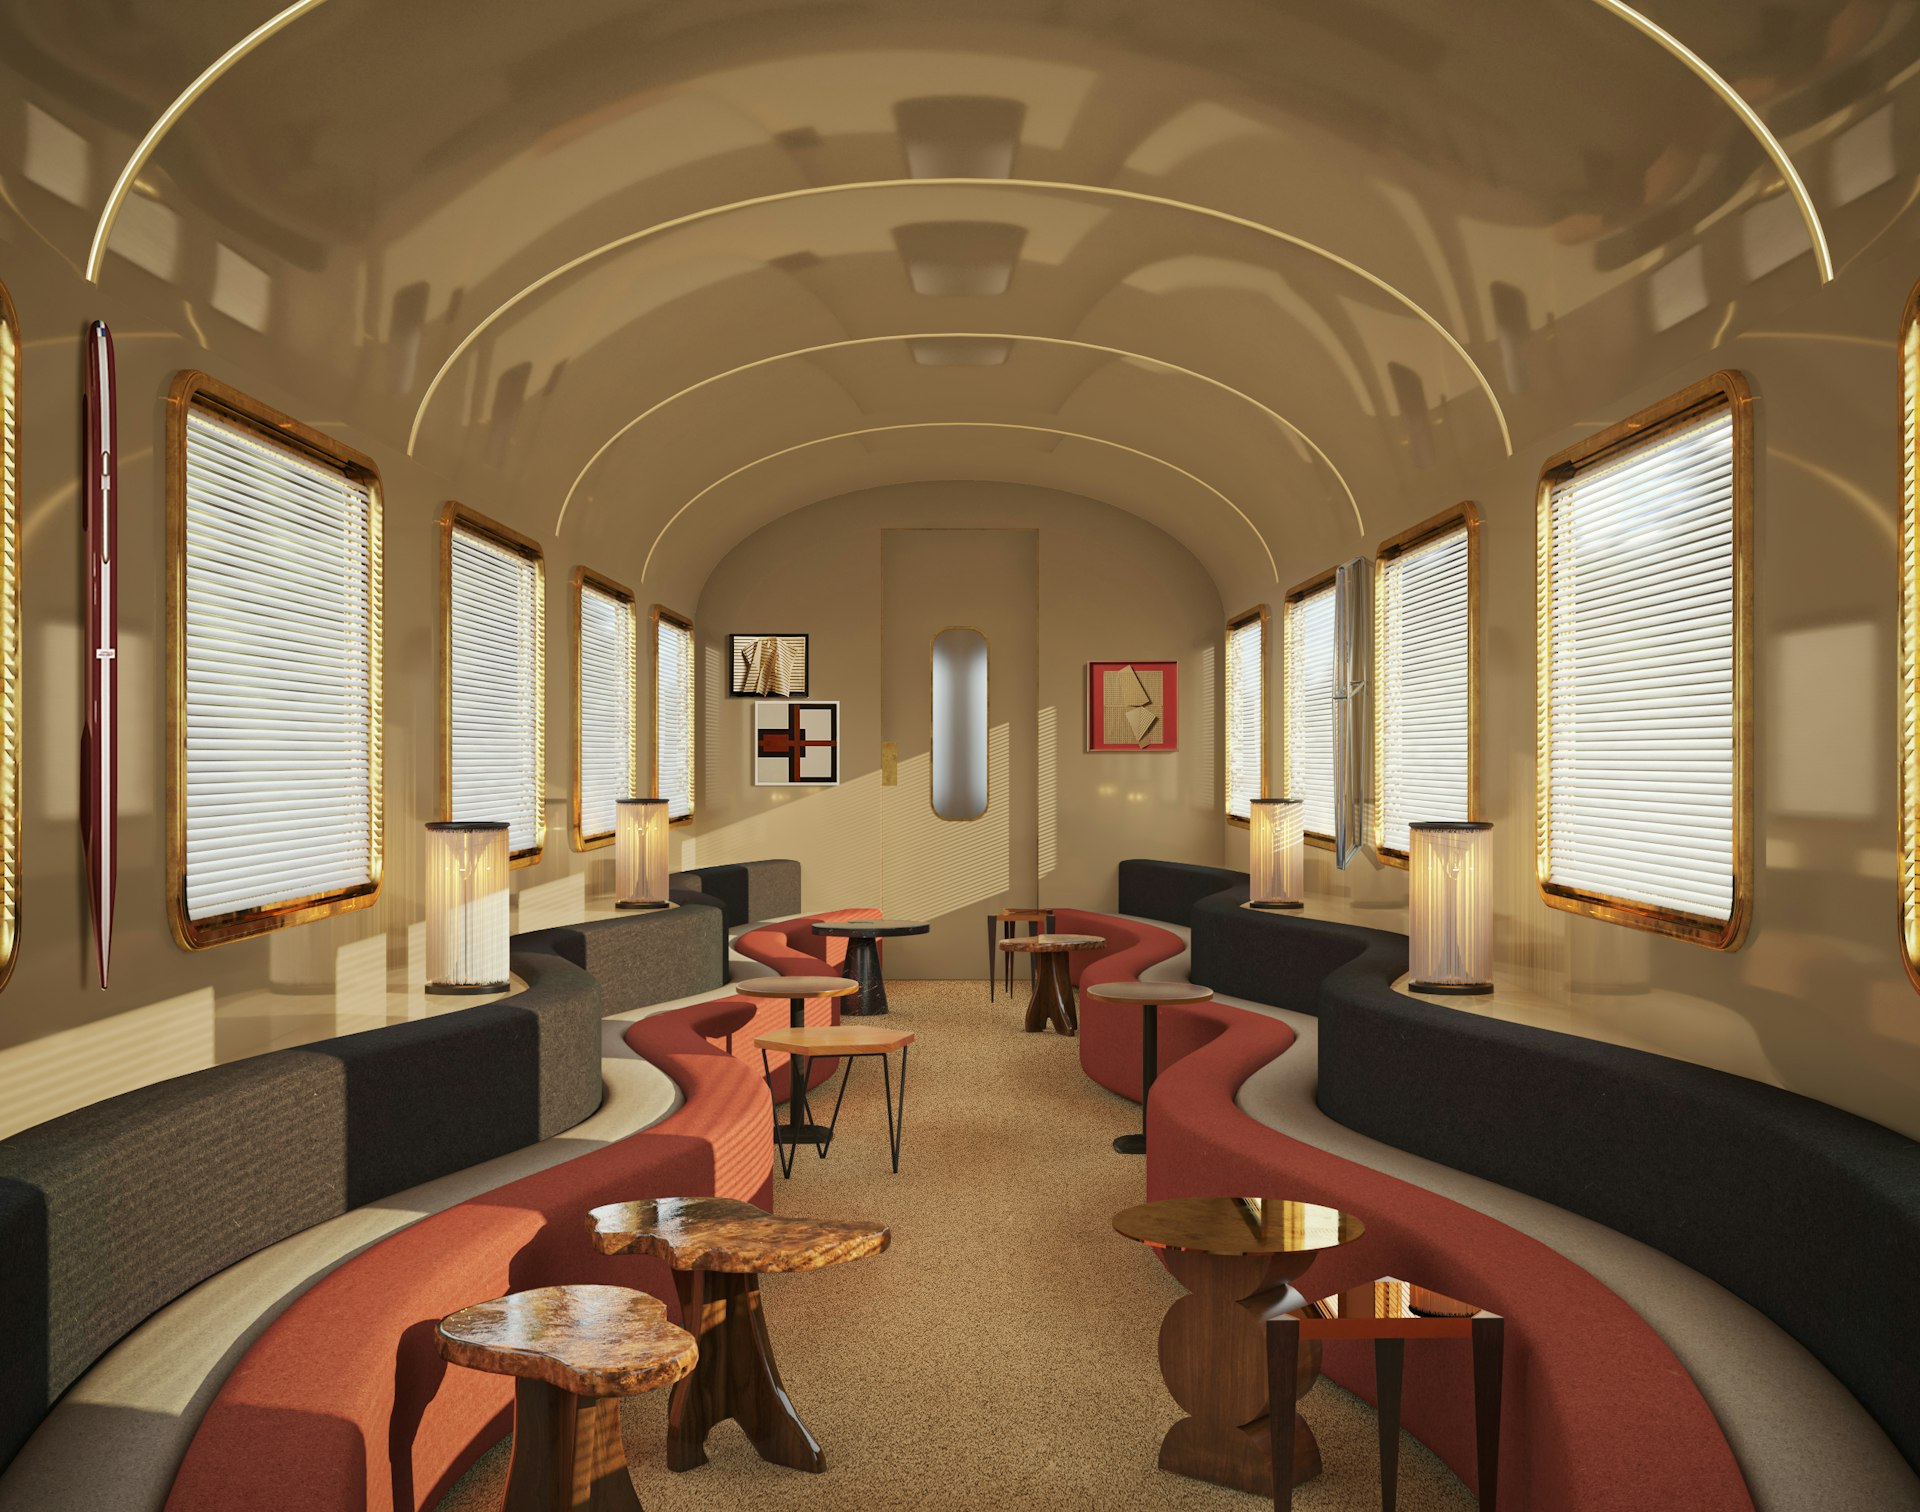 The midcentury-style lounge of the new Orient Express La Dolce Vita train